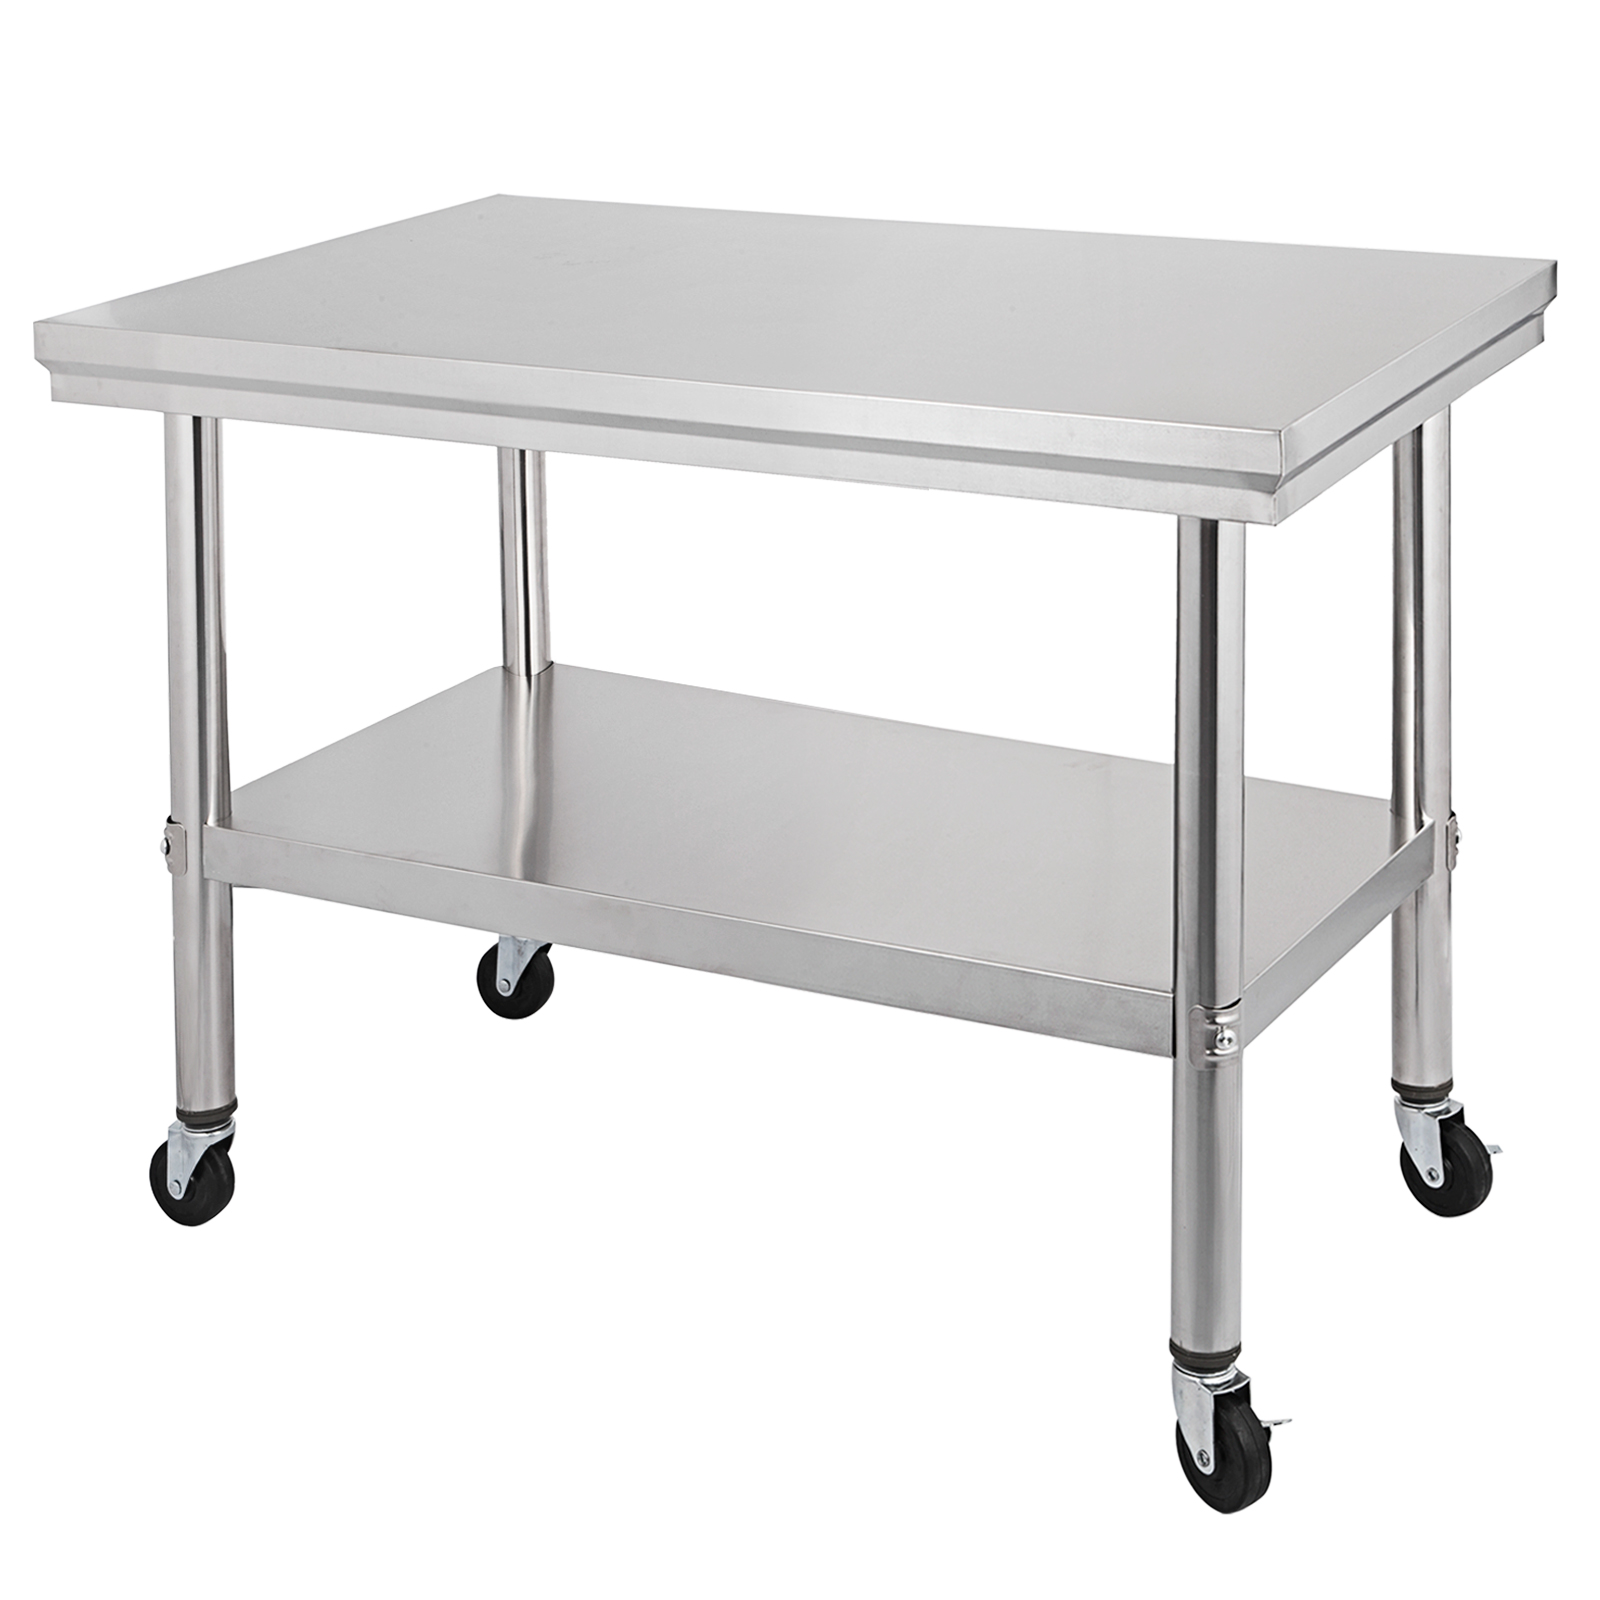 Stainless Steel Commercial Kitchen Work Food Prep Table w/ 4 Casters ...